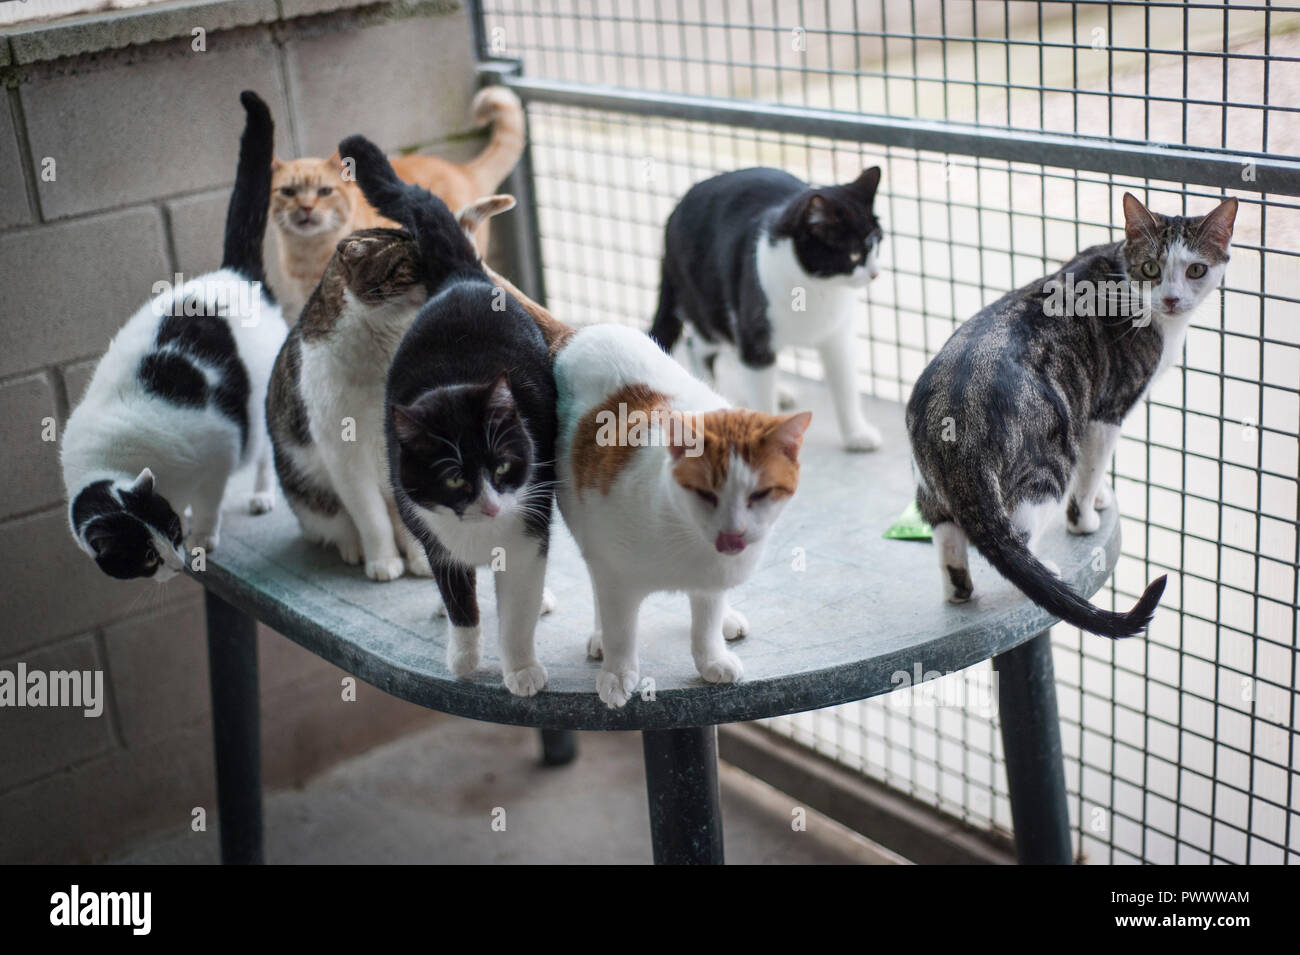 Cats In Jail High Resolution Stock Photography And Images Alamy